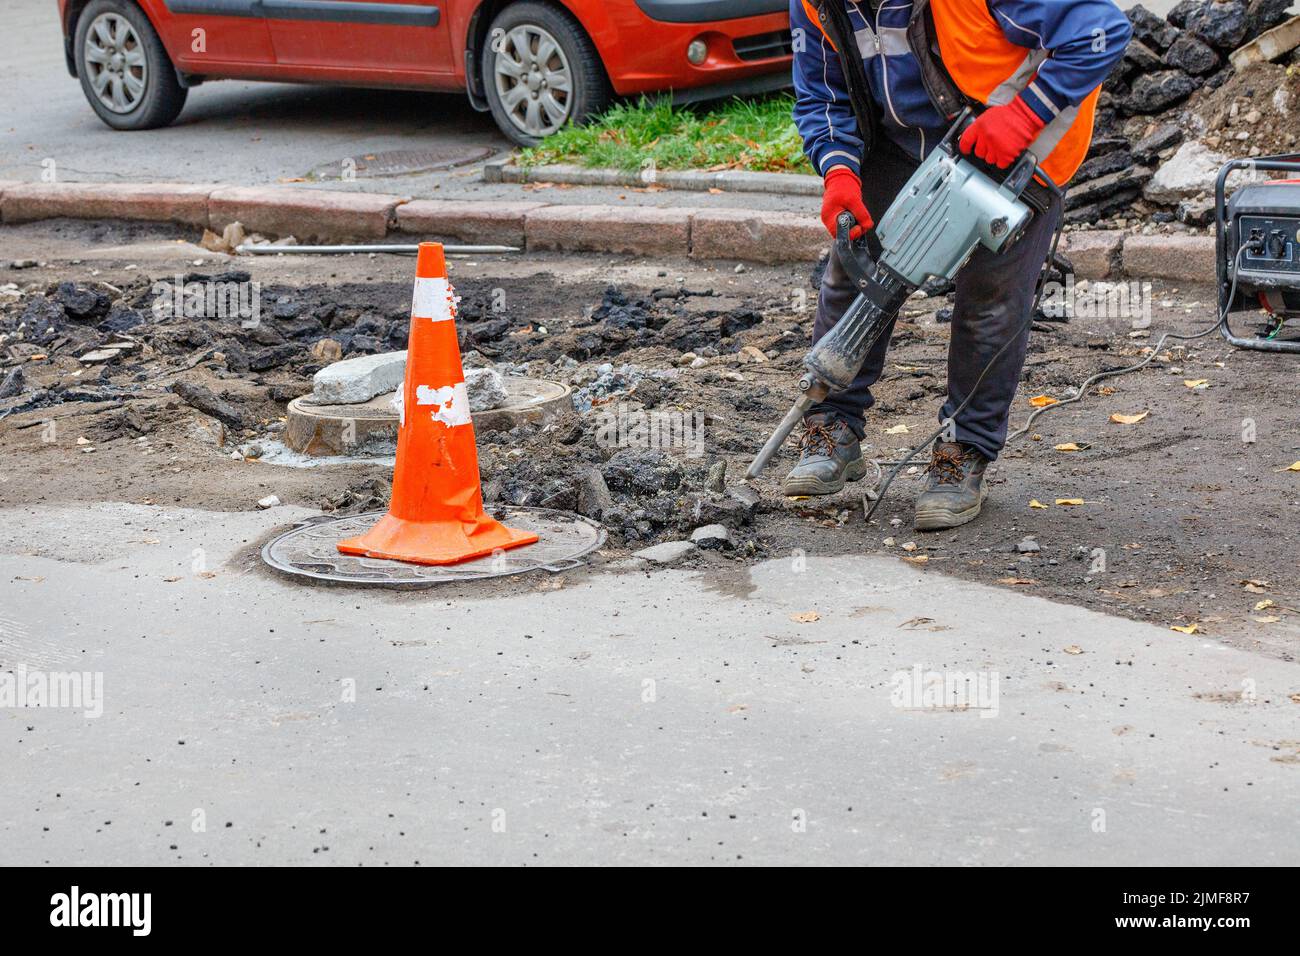 A worker using an electric jackhammer and a gasoline generator cleans the area near the sewer manholes from the old asphalt. Stock Photo